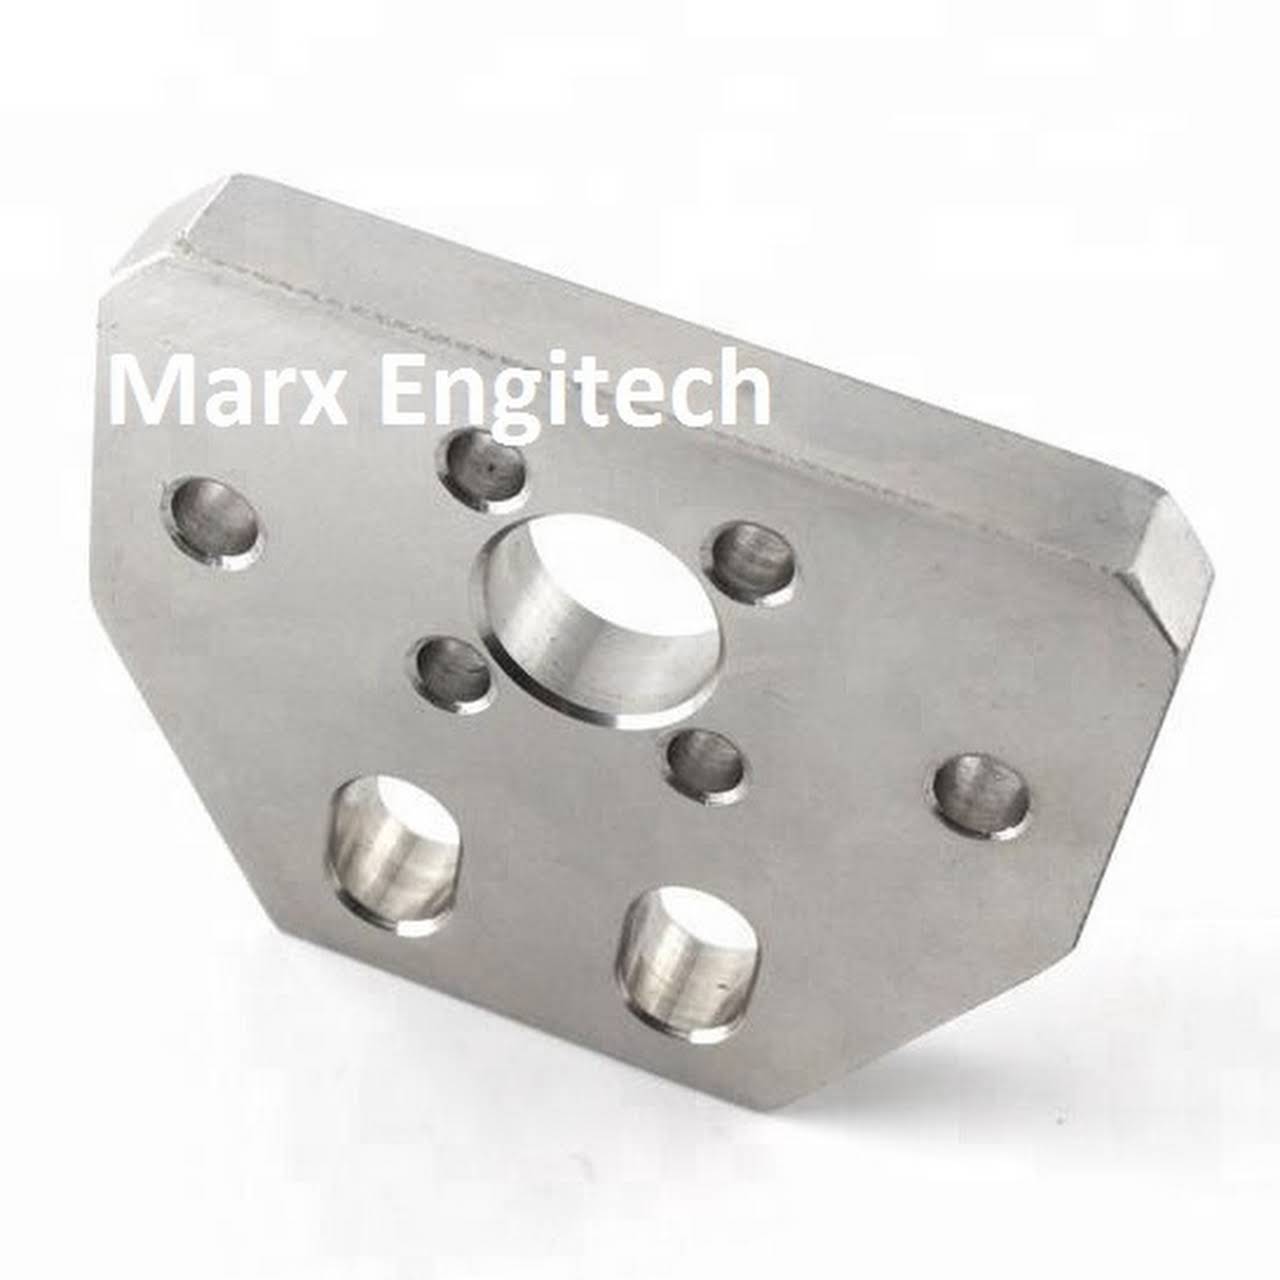 VMC Machined Components